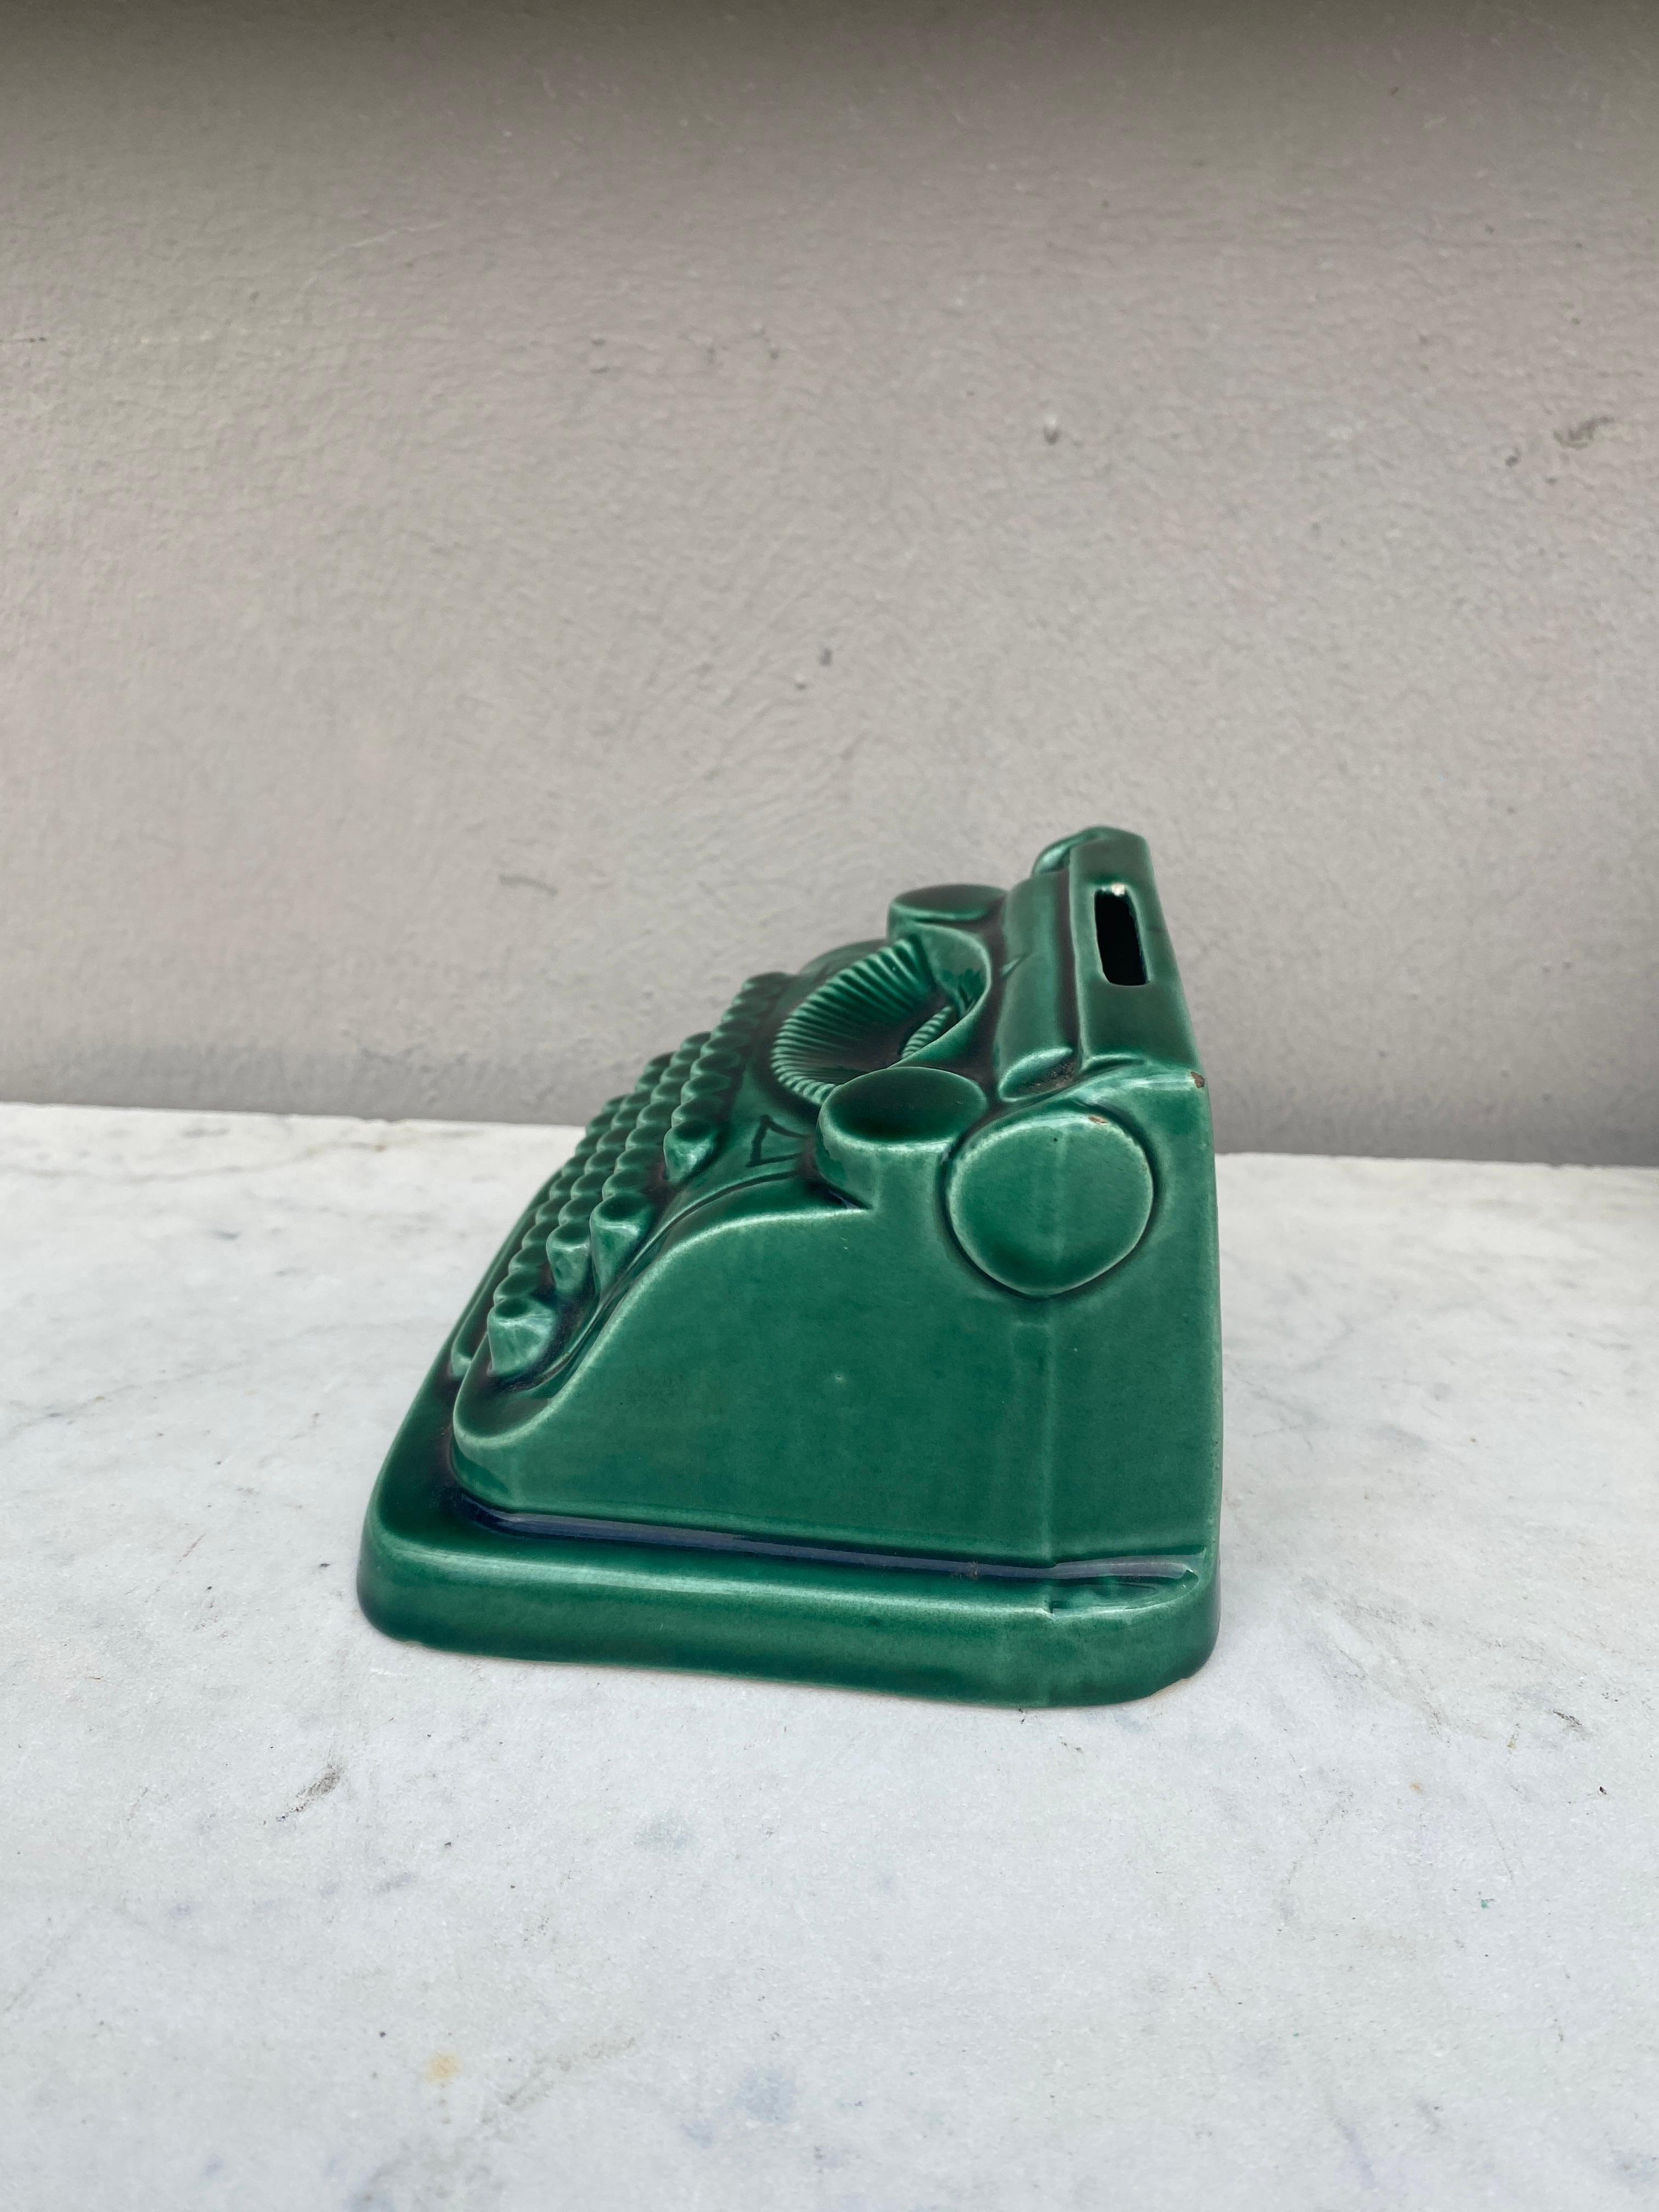 French Green Majolica Money Bank Typewriter Circa 1950 In Good Condition For Sale In Austin, TX